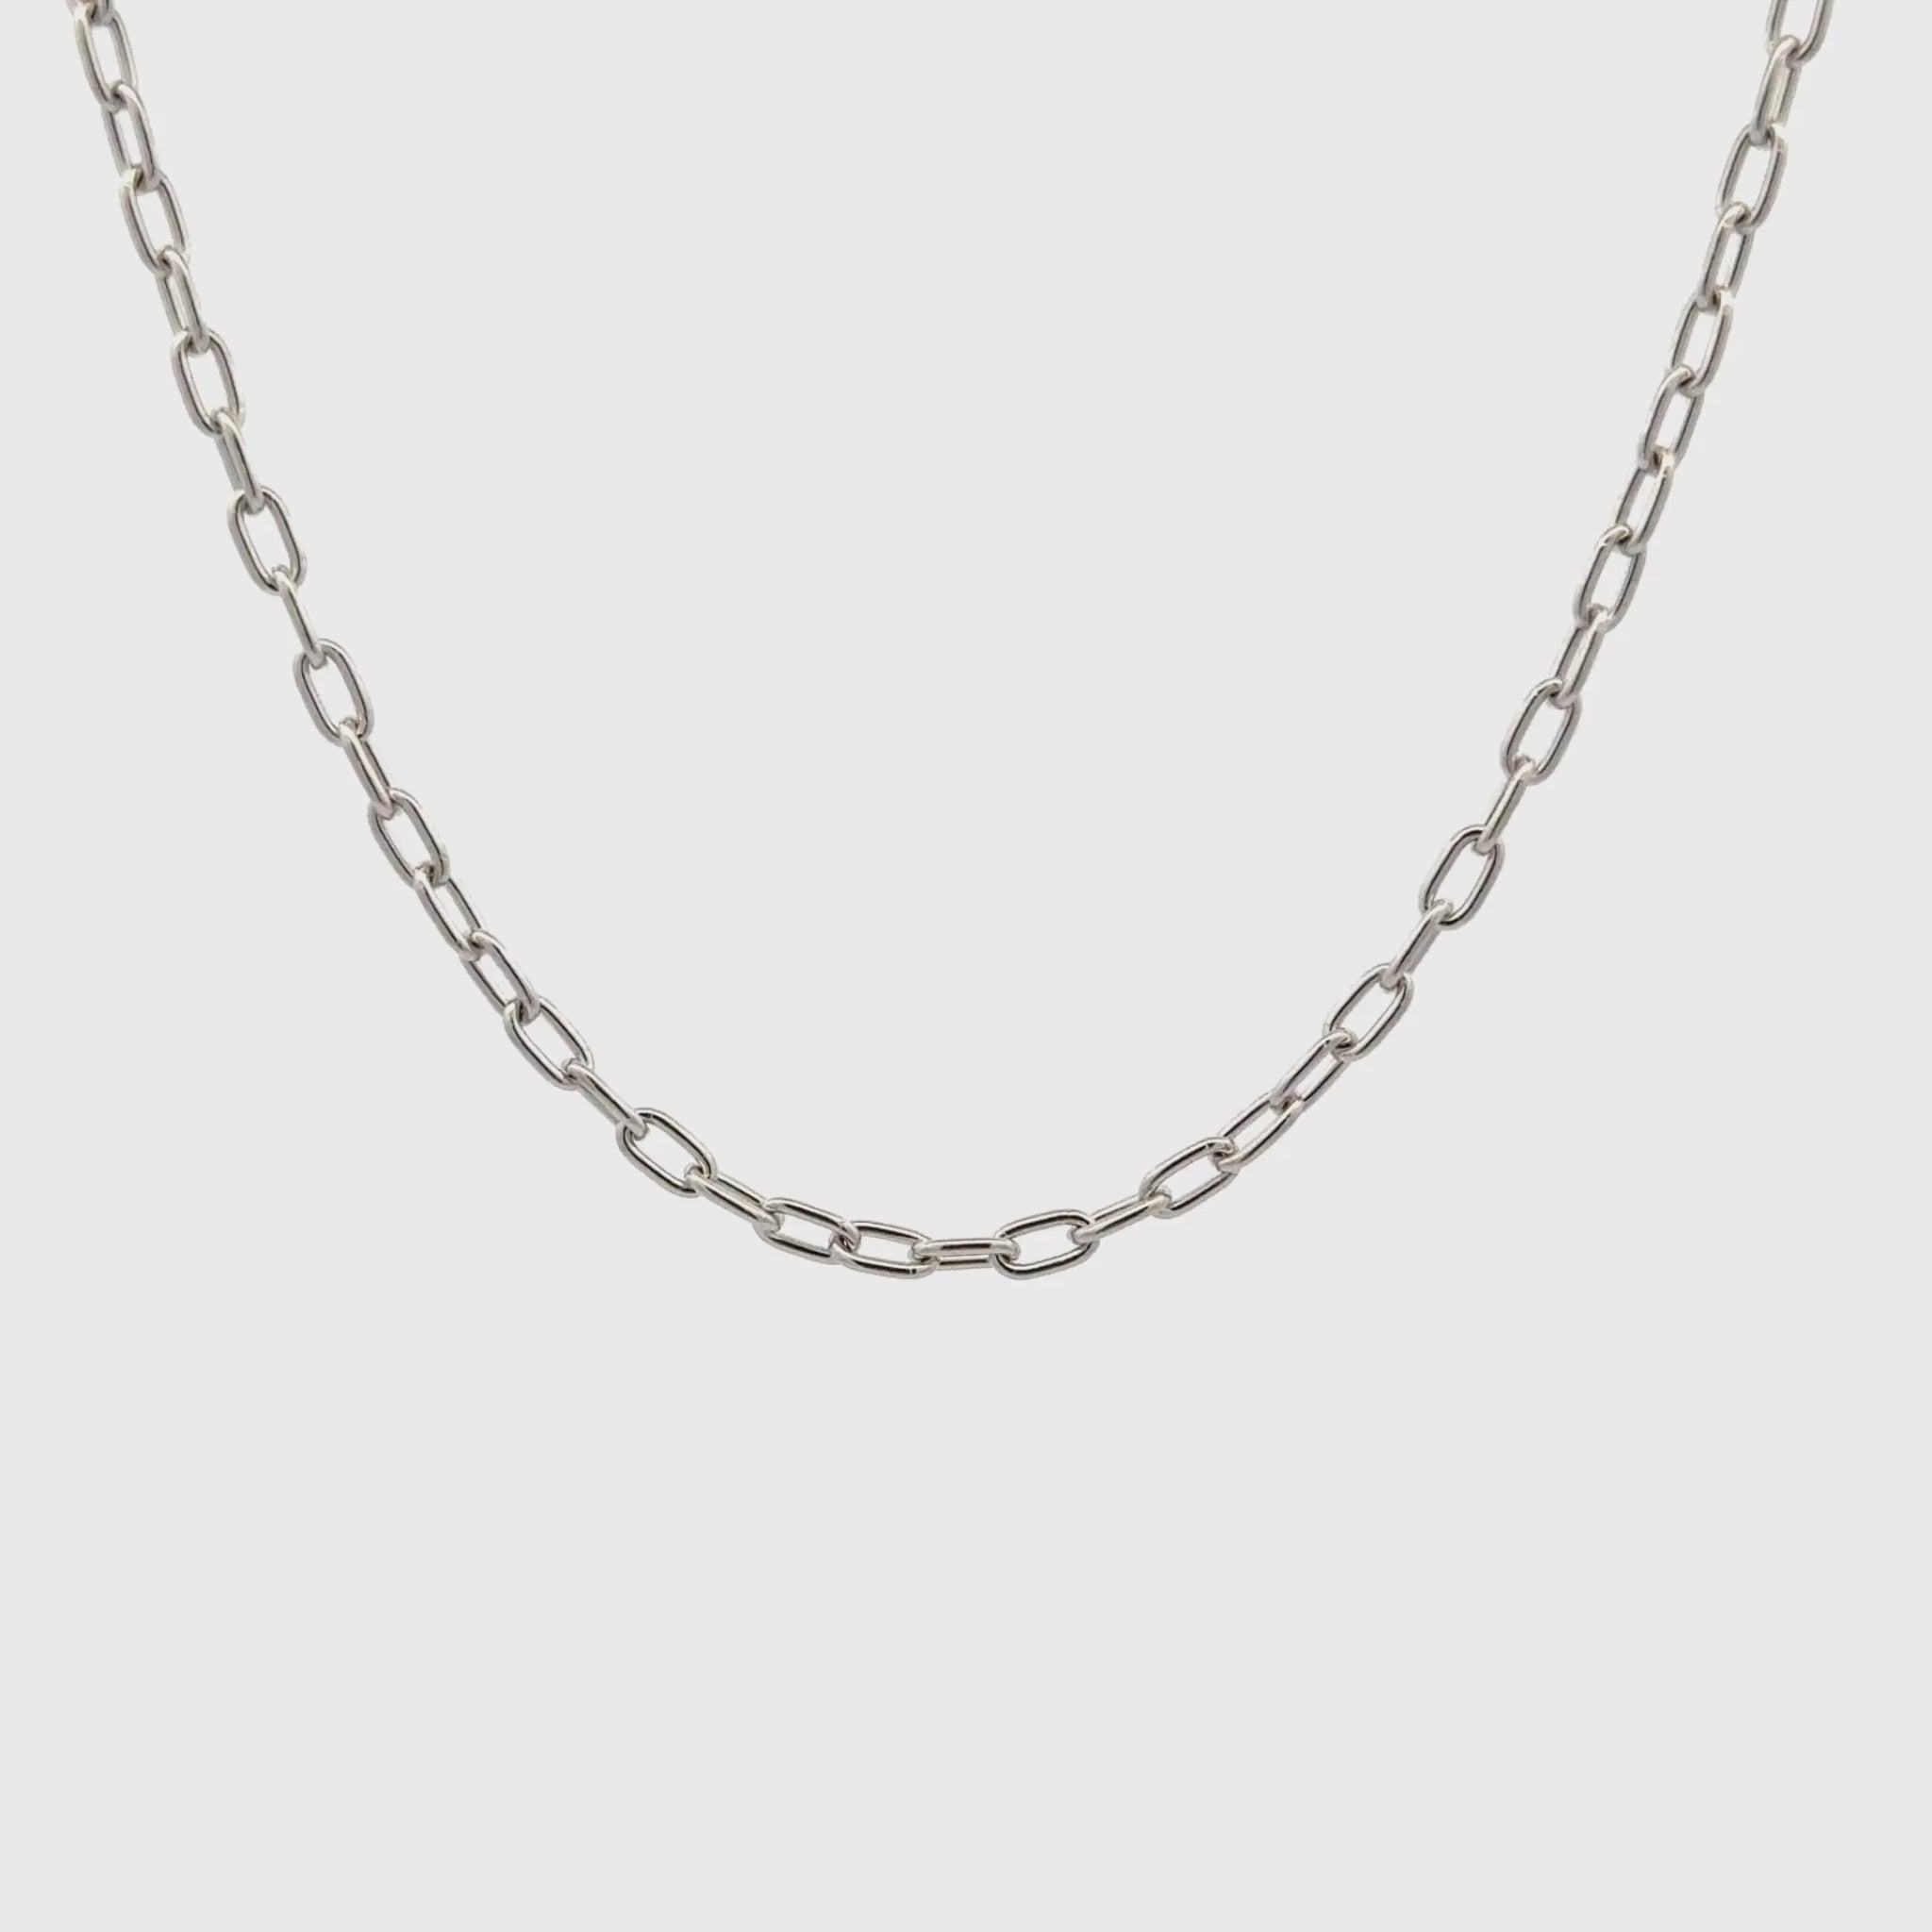 9K White Gold Polished 50cm Elongated Trace Chain 2.3mm